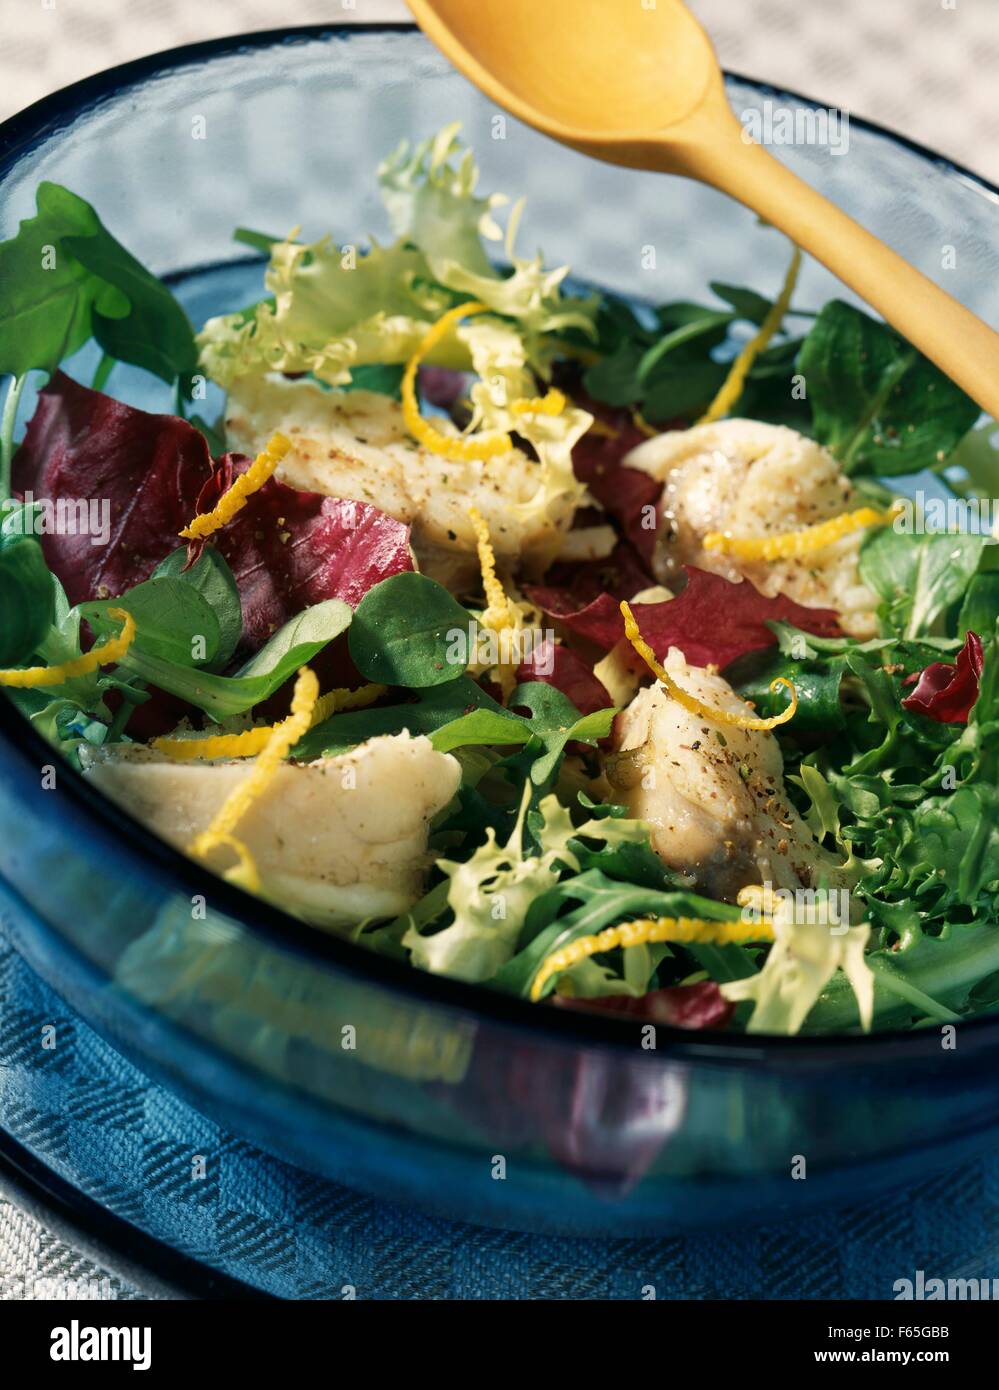 Monkfish tail salad with lemon zest (topic : cooking today) Stock Photo